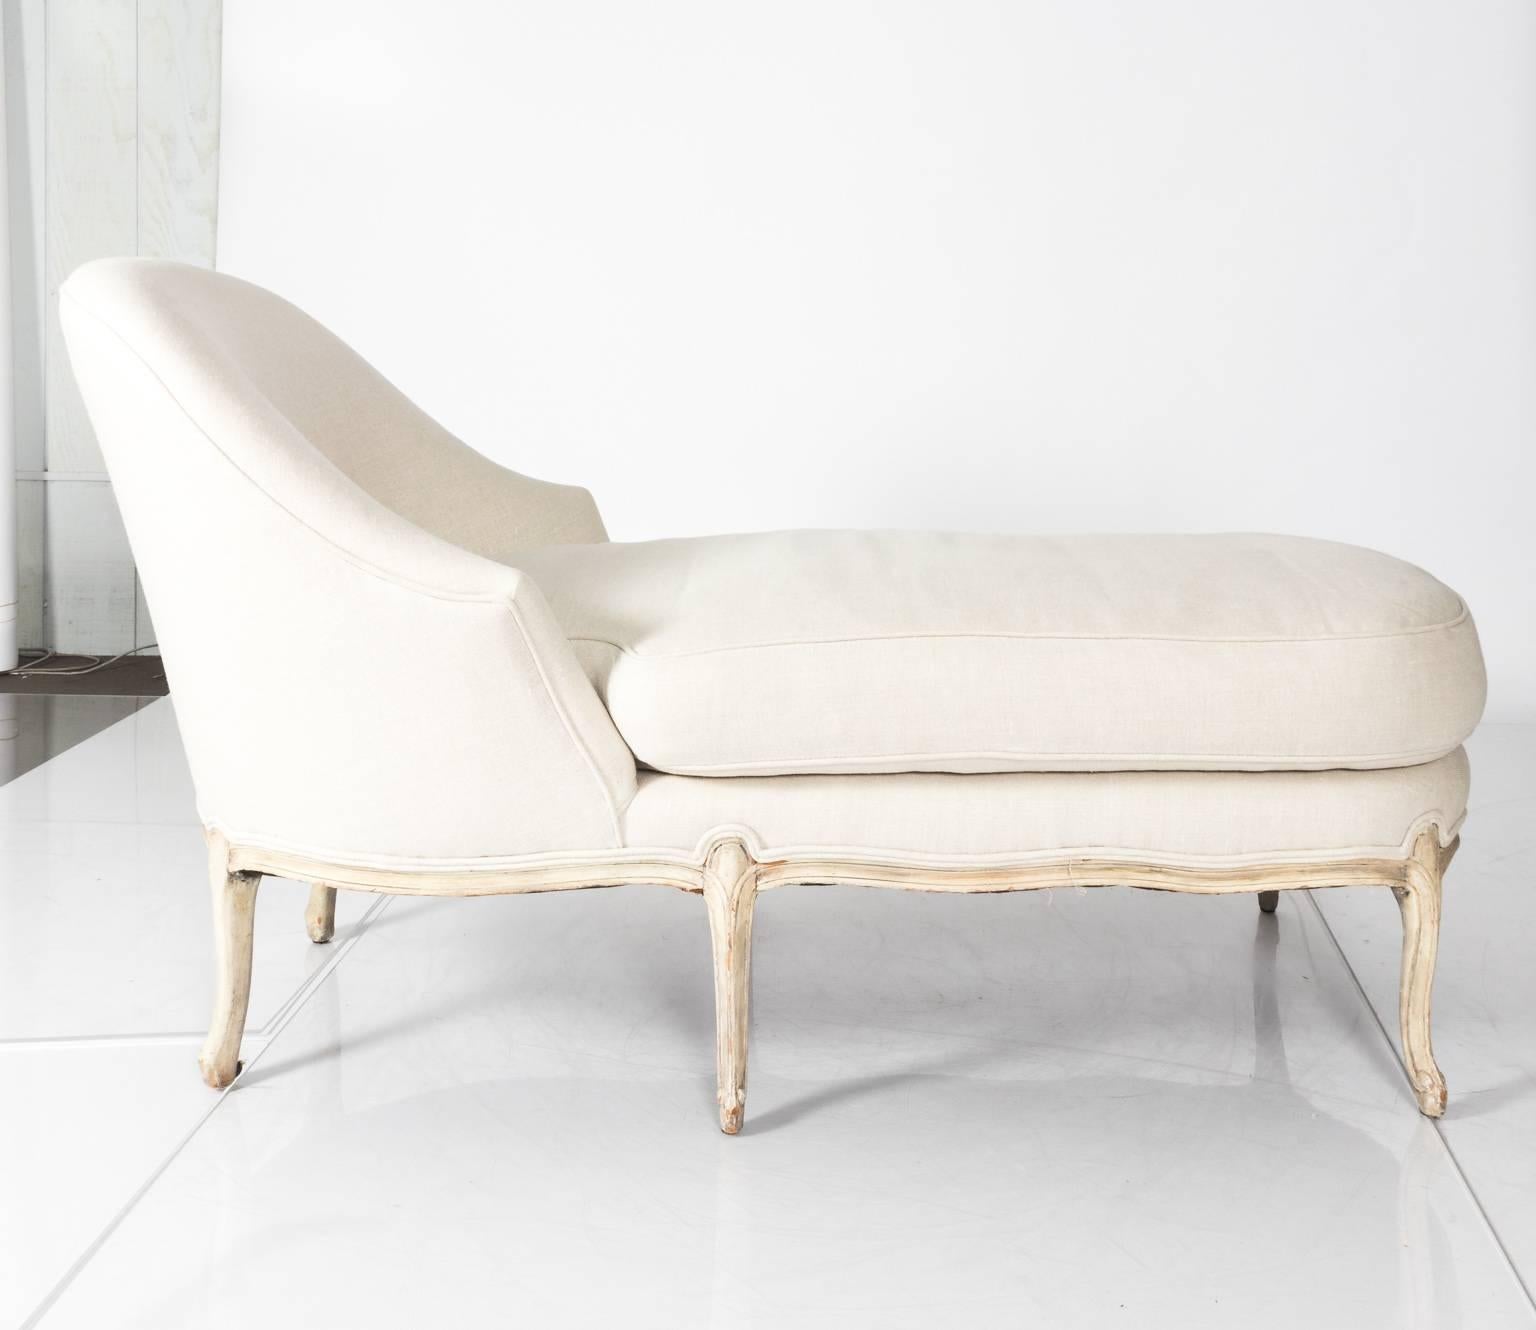 Louis XV style linen upholstered chaise longue, circa 1920.
    